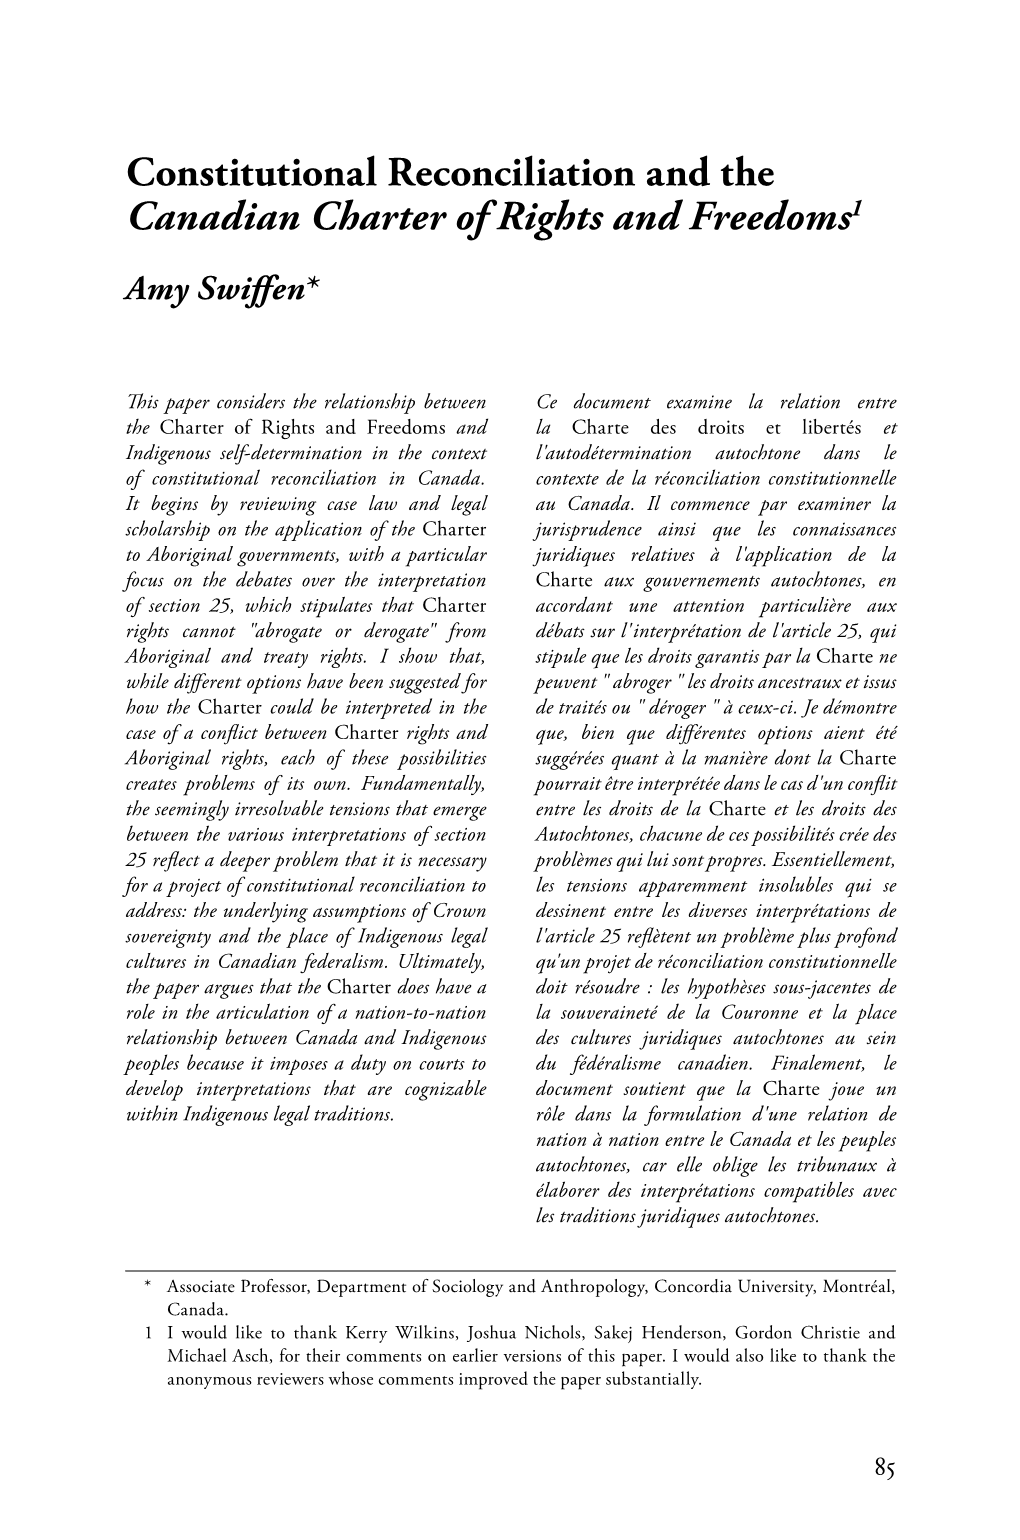 Constitutional Reconciliation and the Canadian Charter of Rights and Freedoms 1 Amy Swi! En*